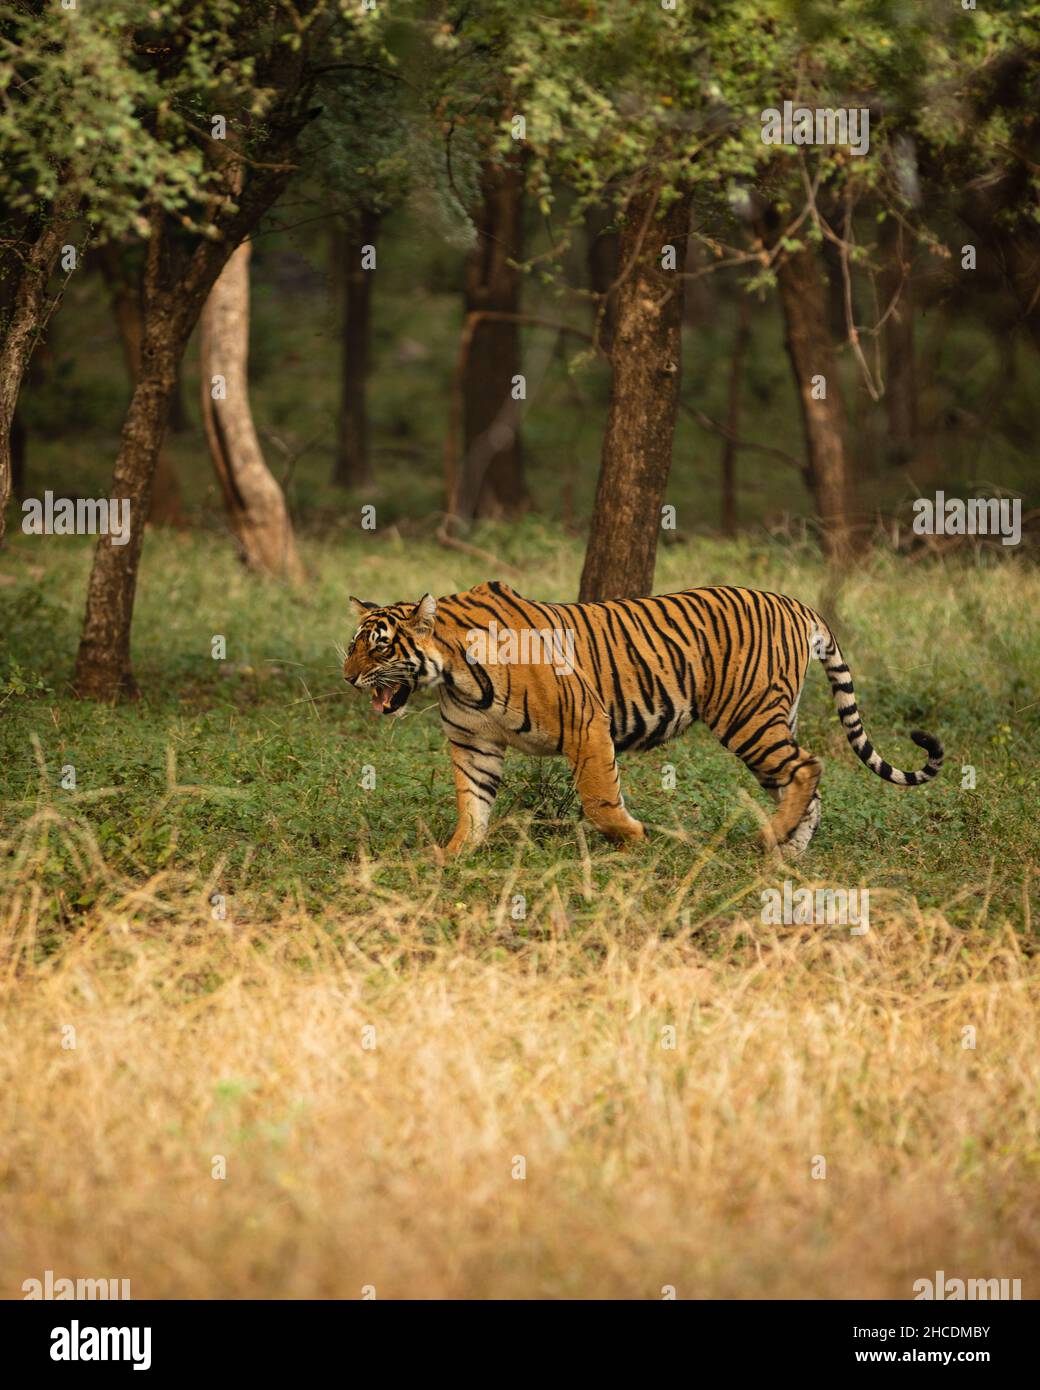 Indian tiger in national park with eye contact and cubs walking Stock Photo